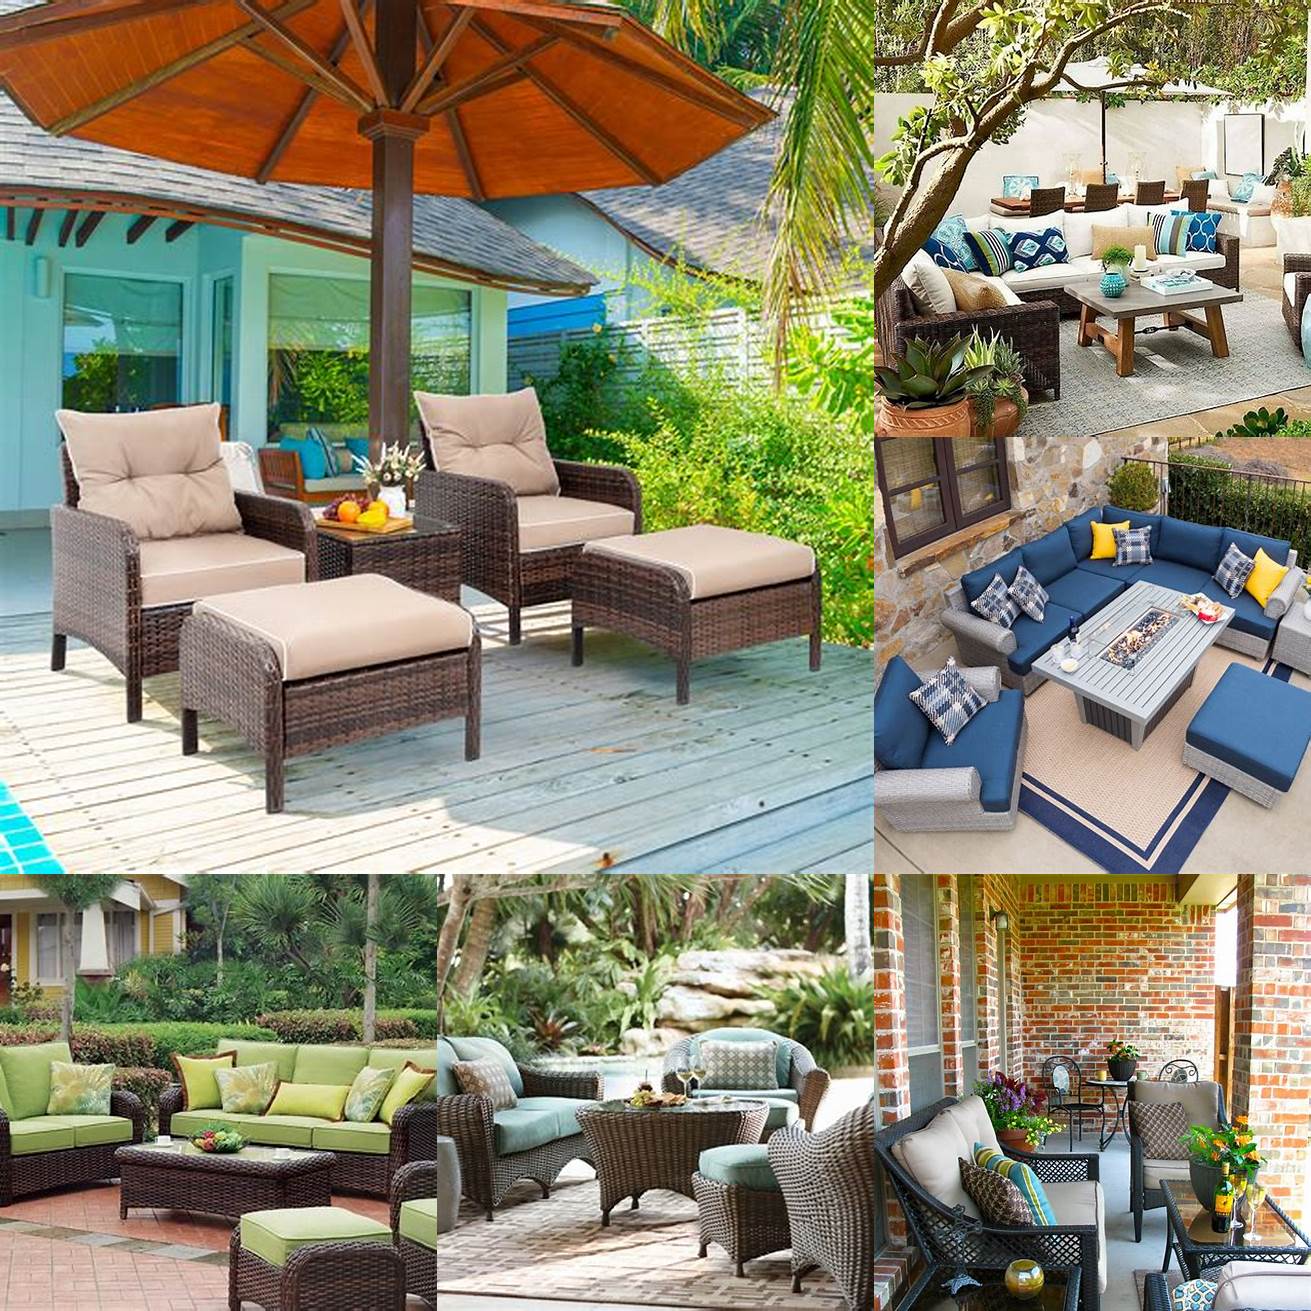 Choose a style that matches the overall look and feel of your patio area